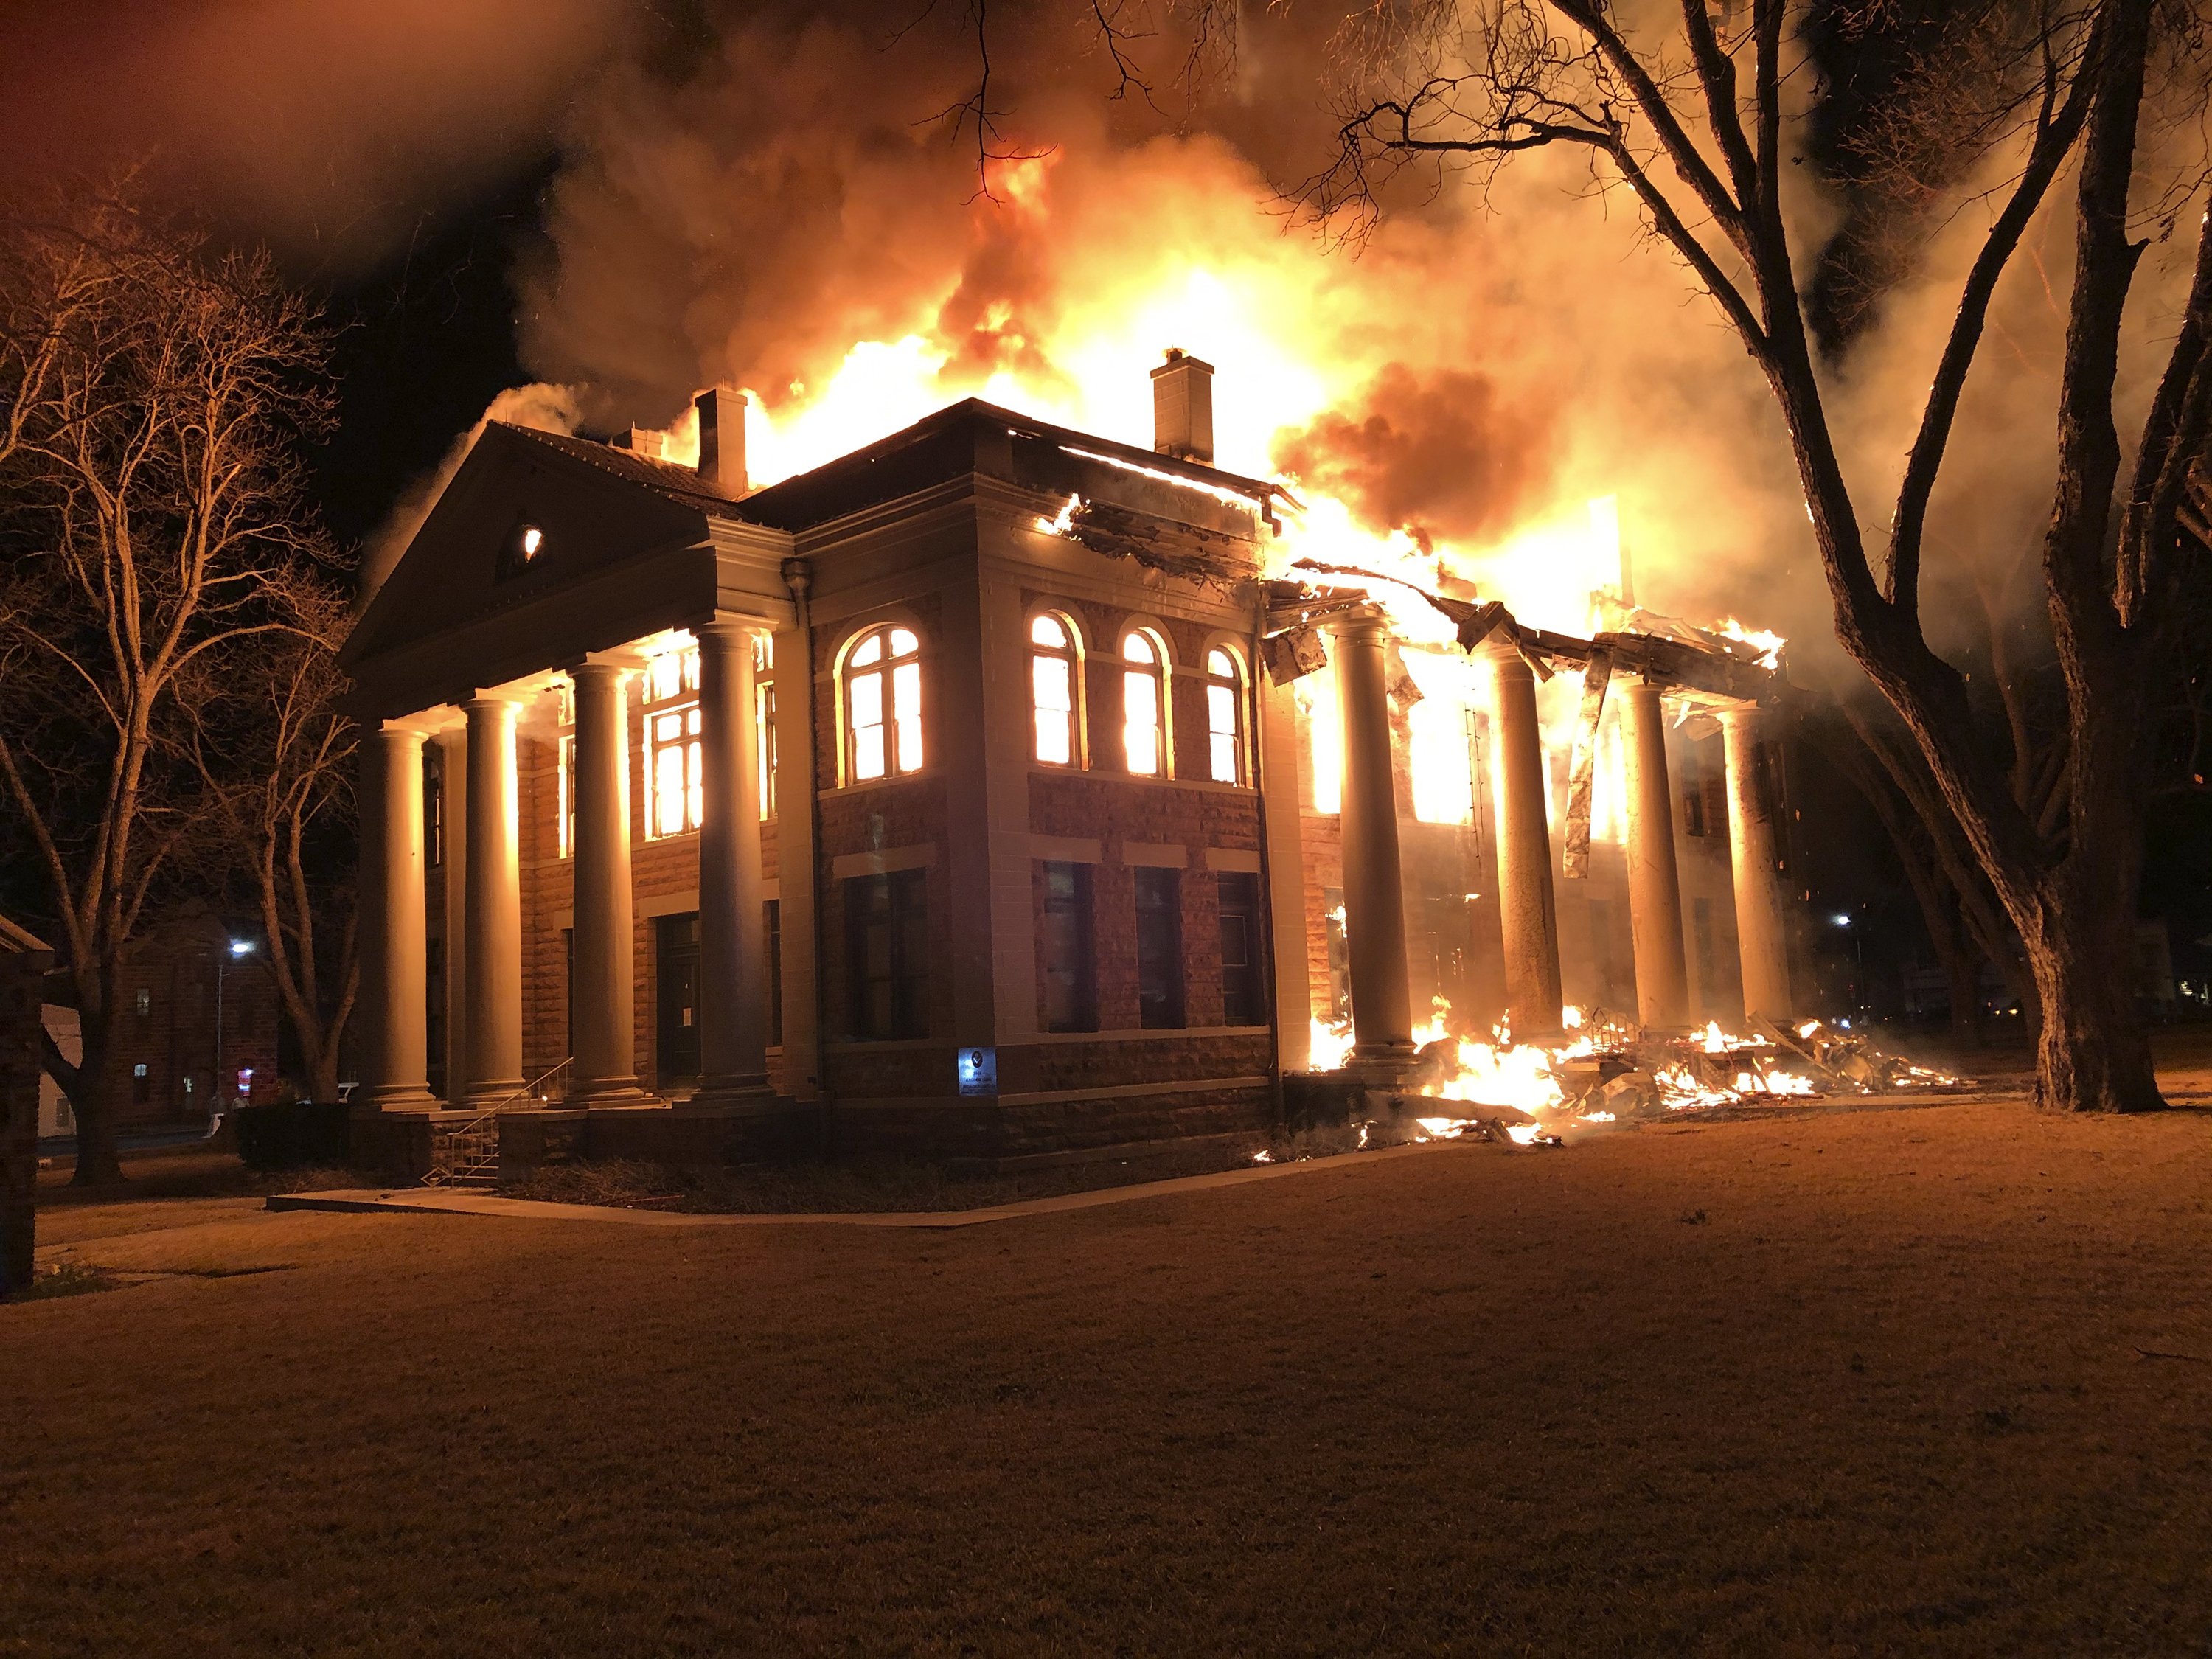 Arson suspected in mass fire in Texas courthouse